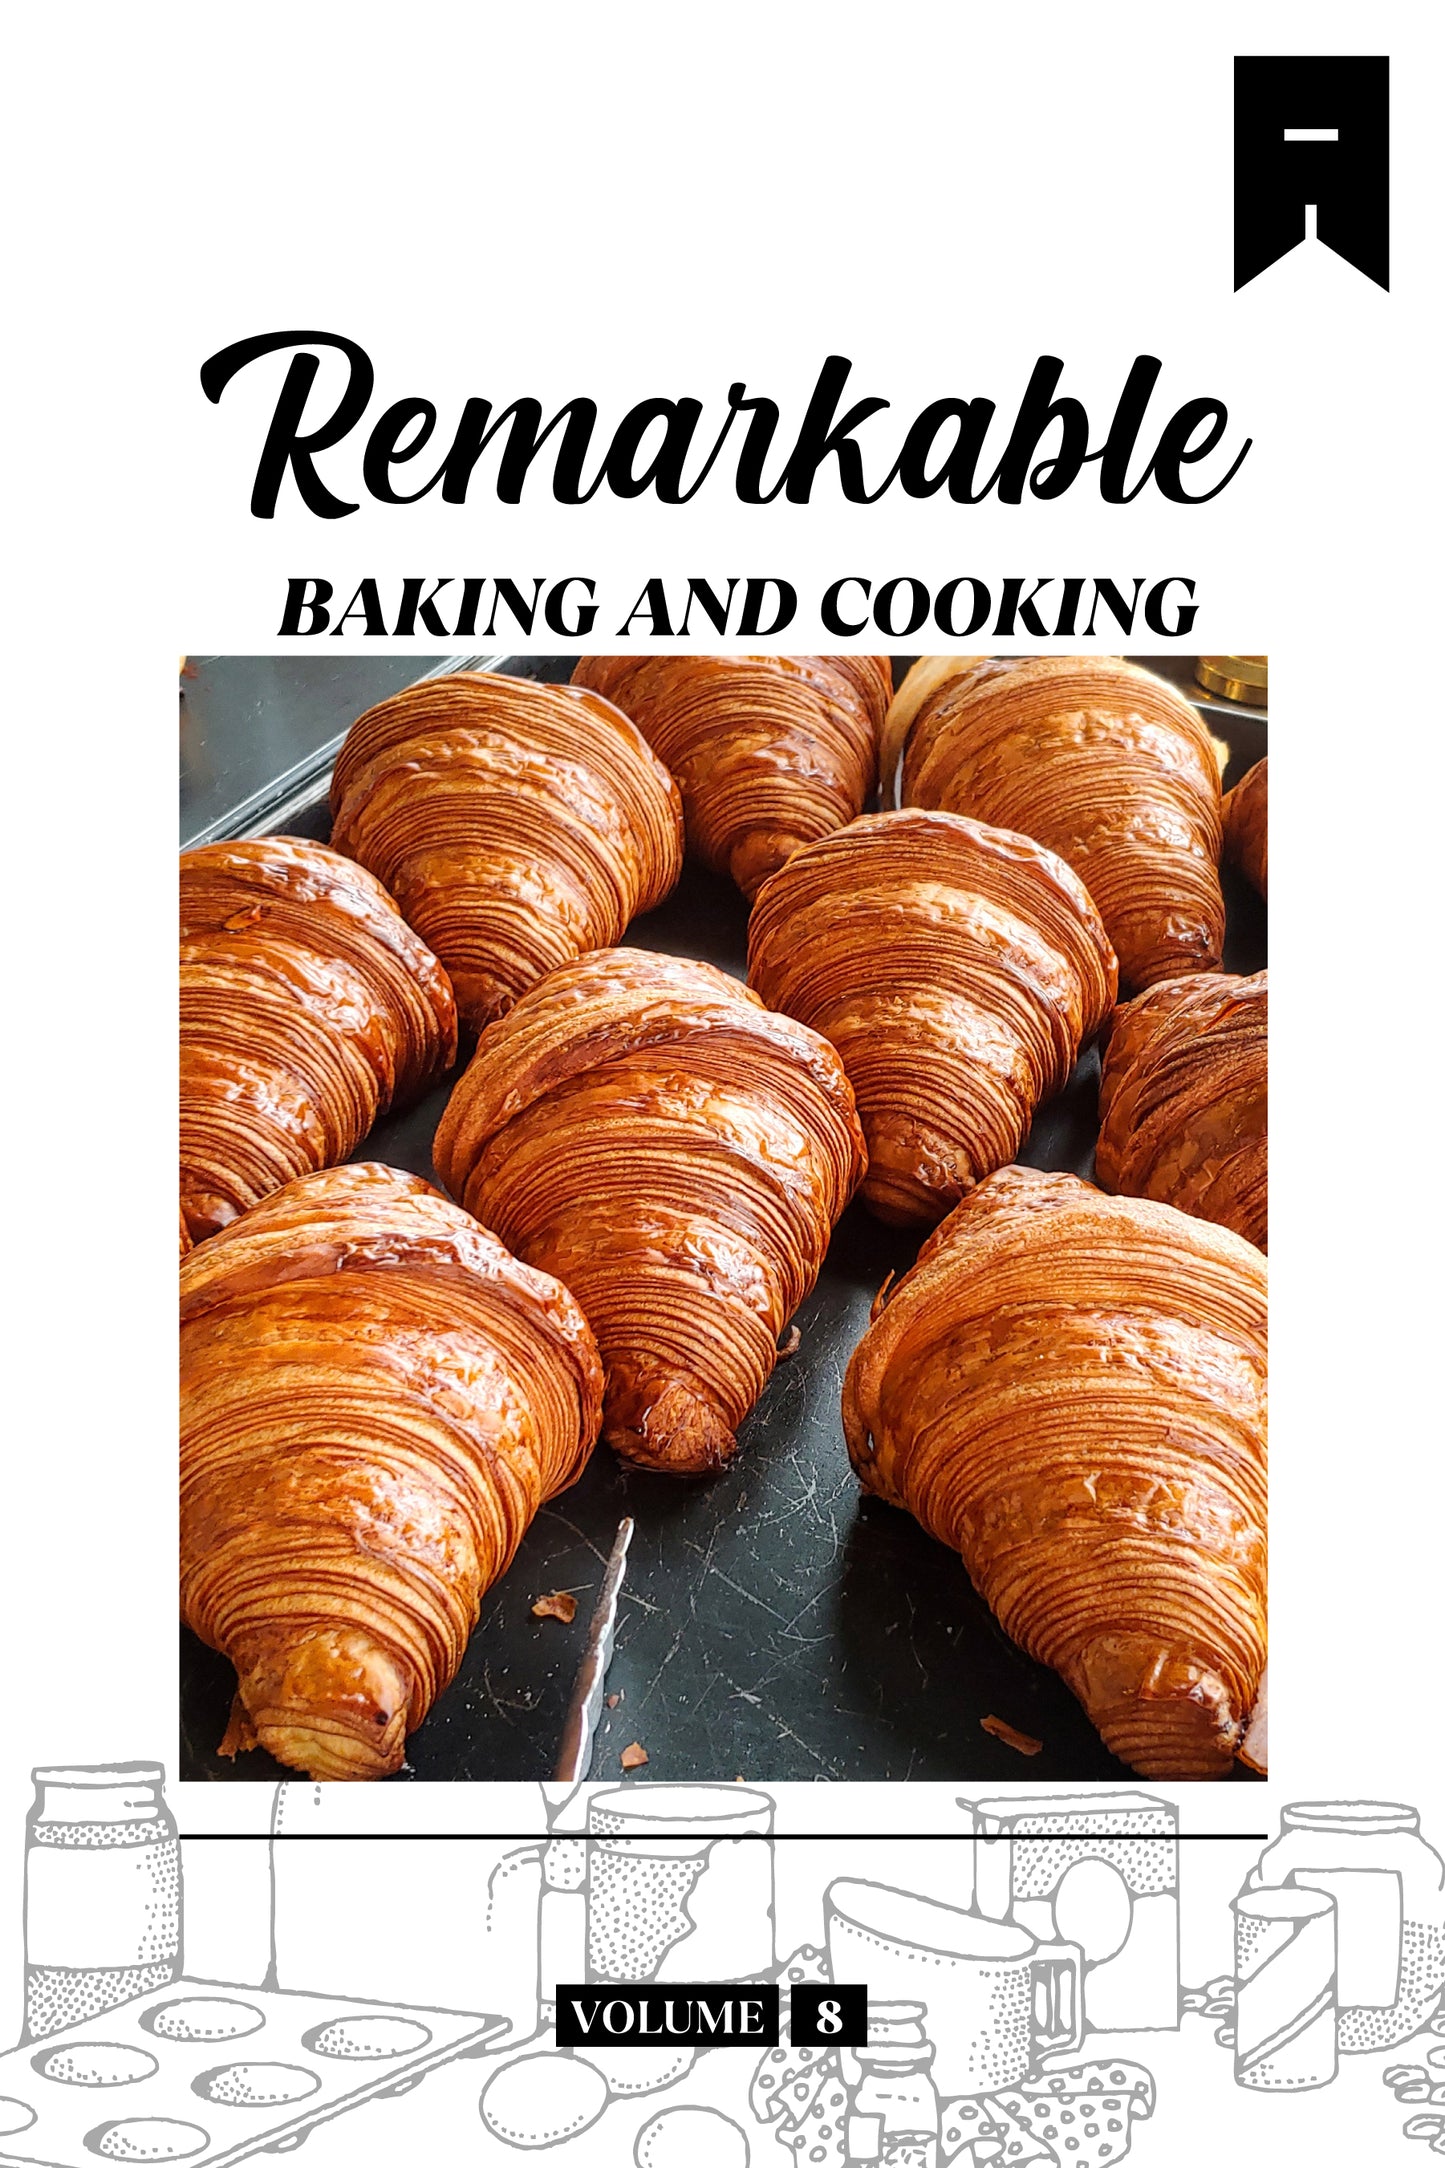 Remarkable Baking (Volume 8) - Physical Book